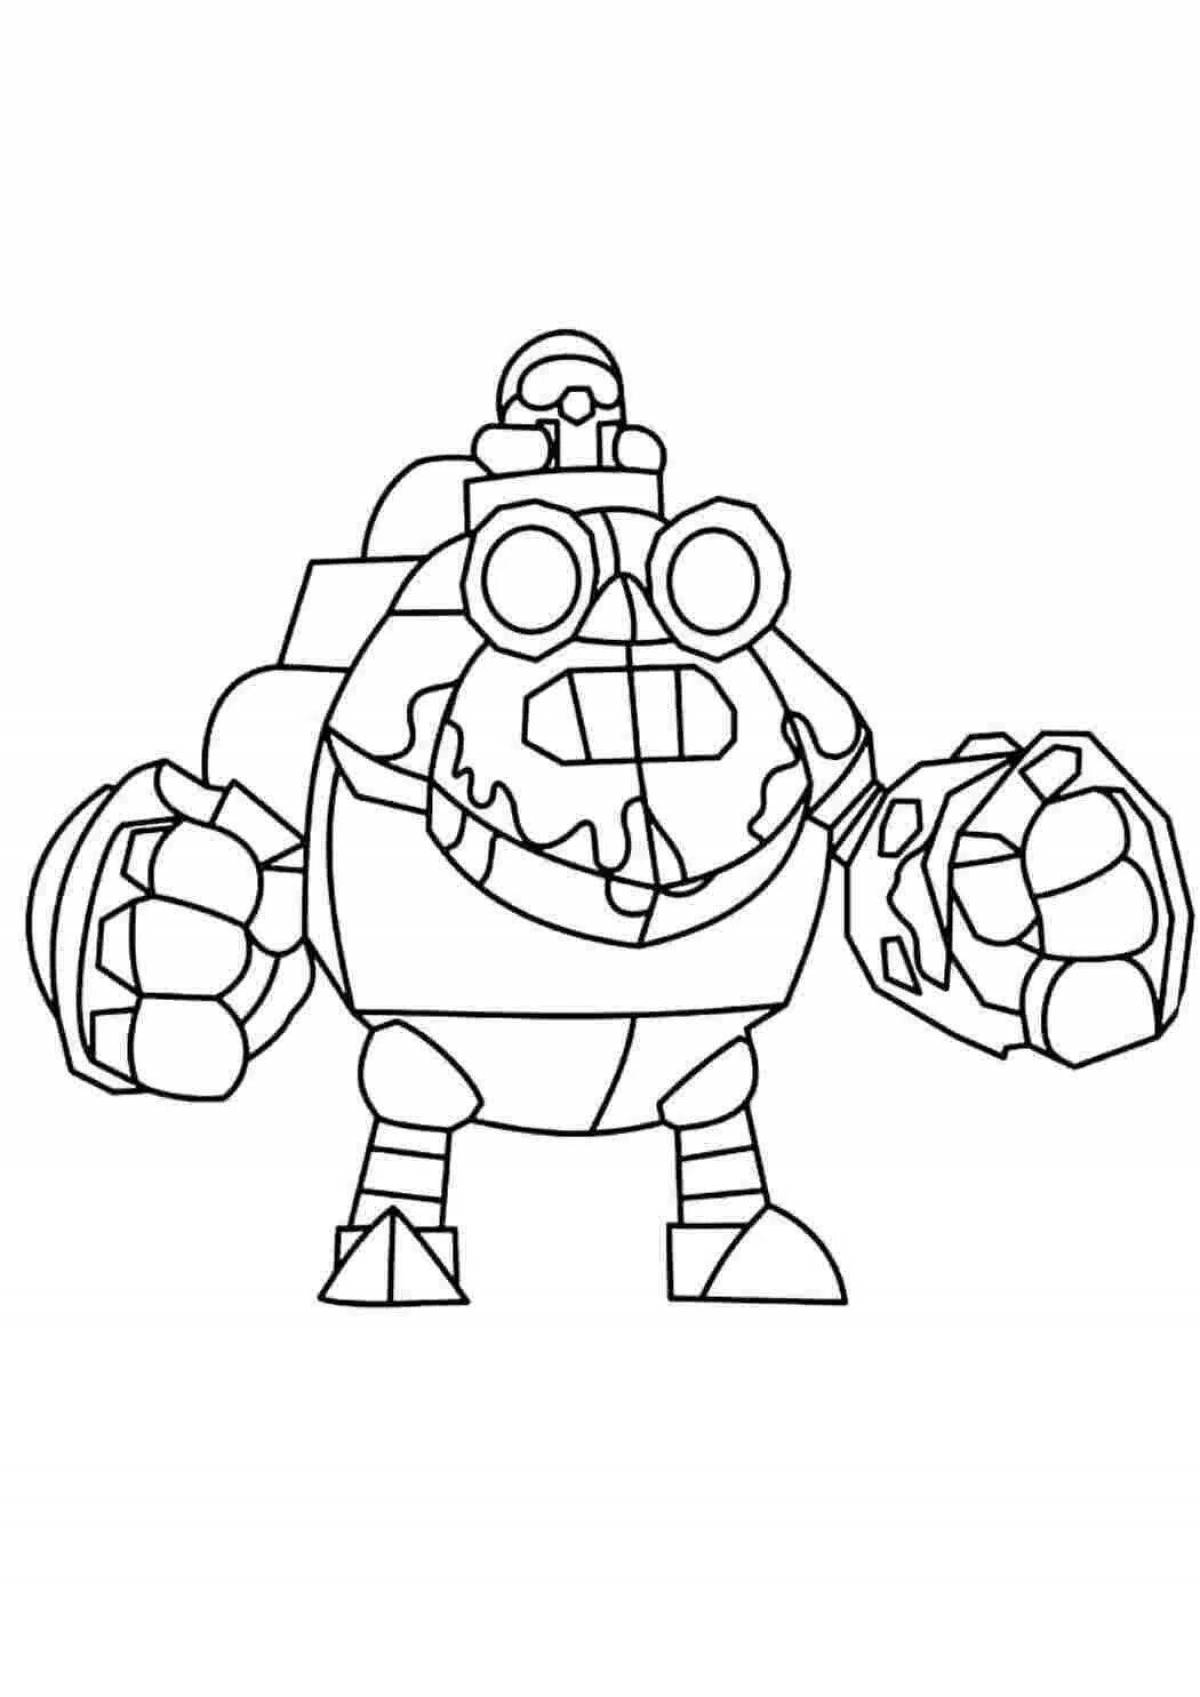 Charming dynamike coloring book